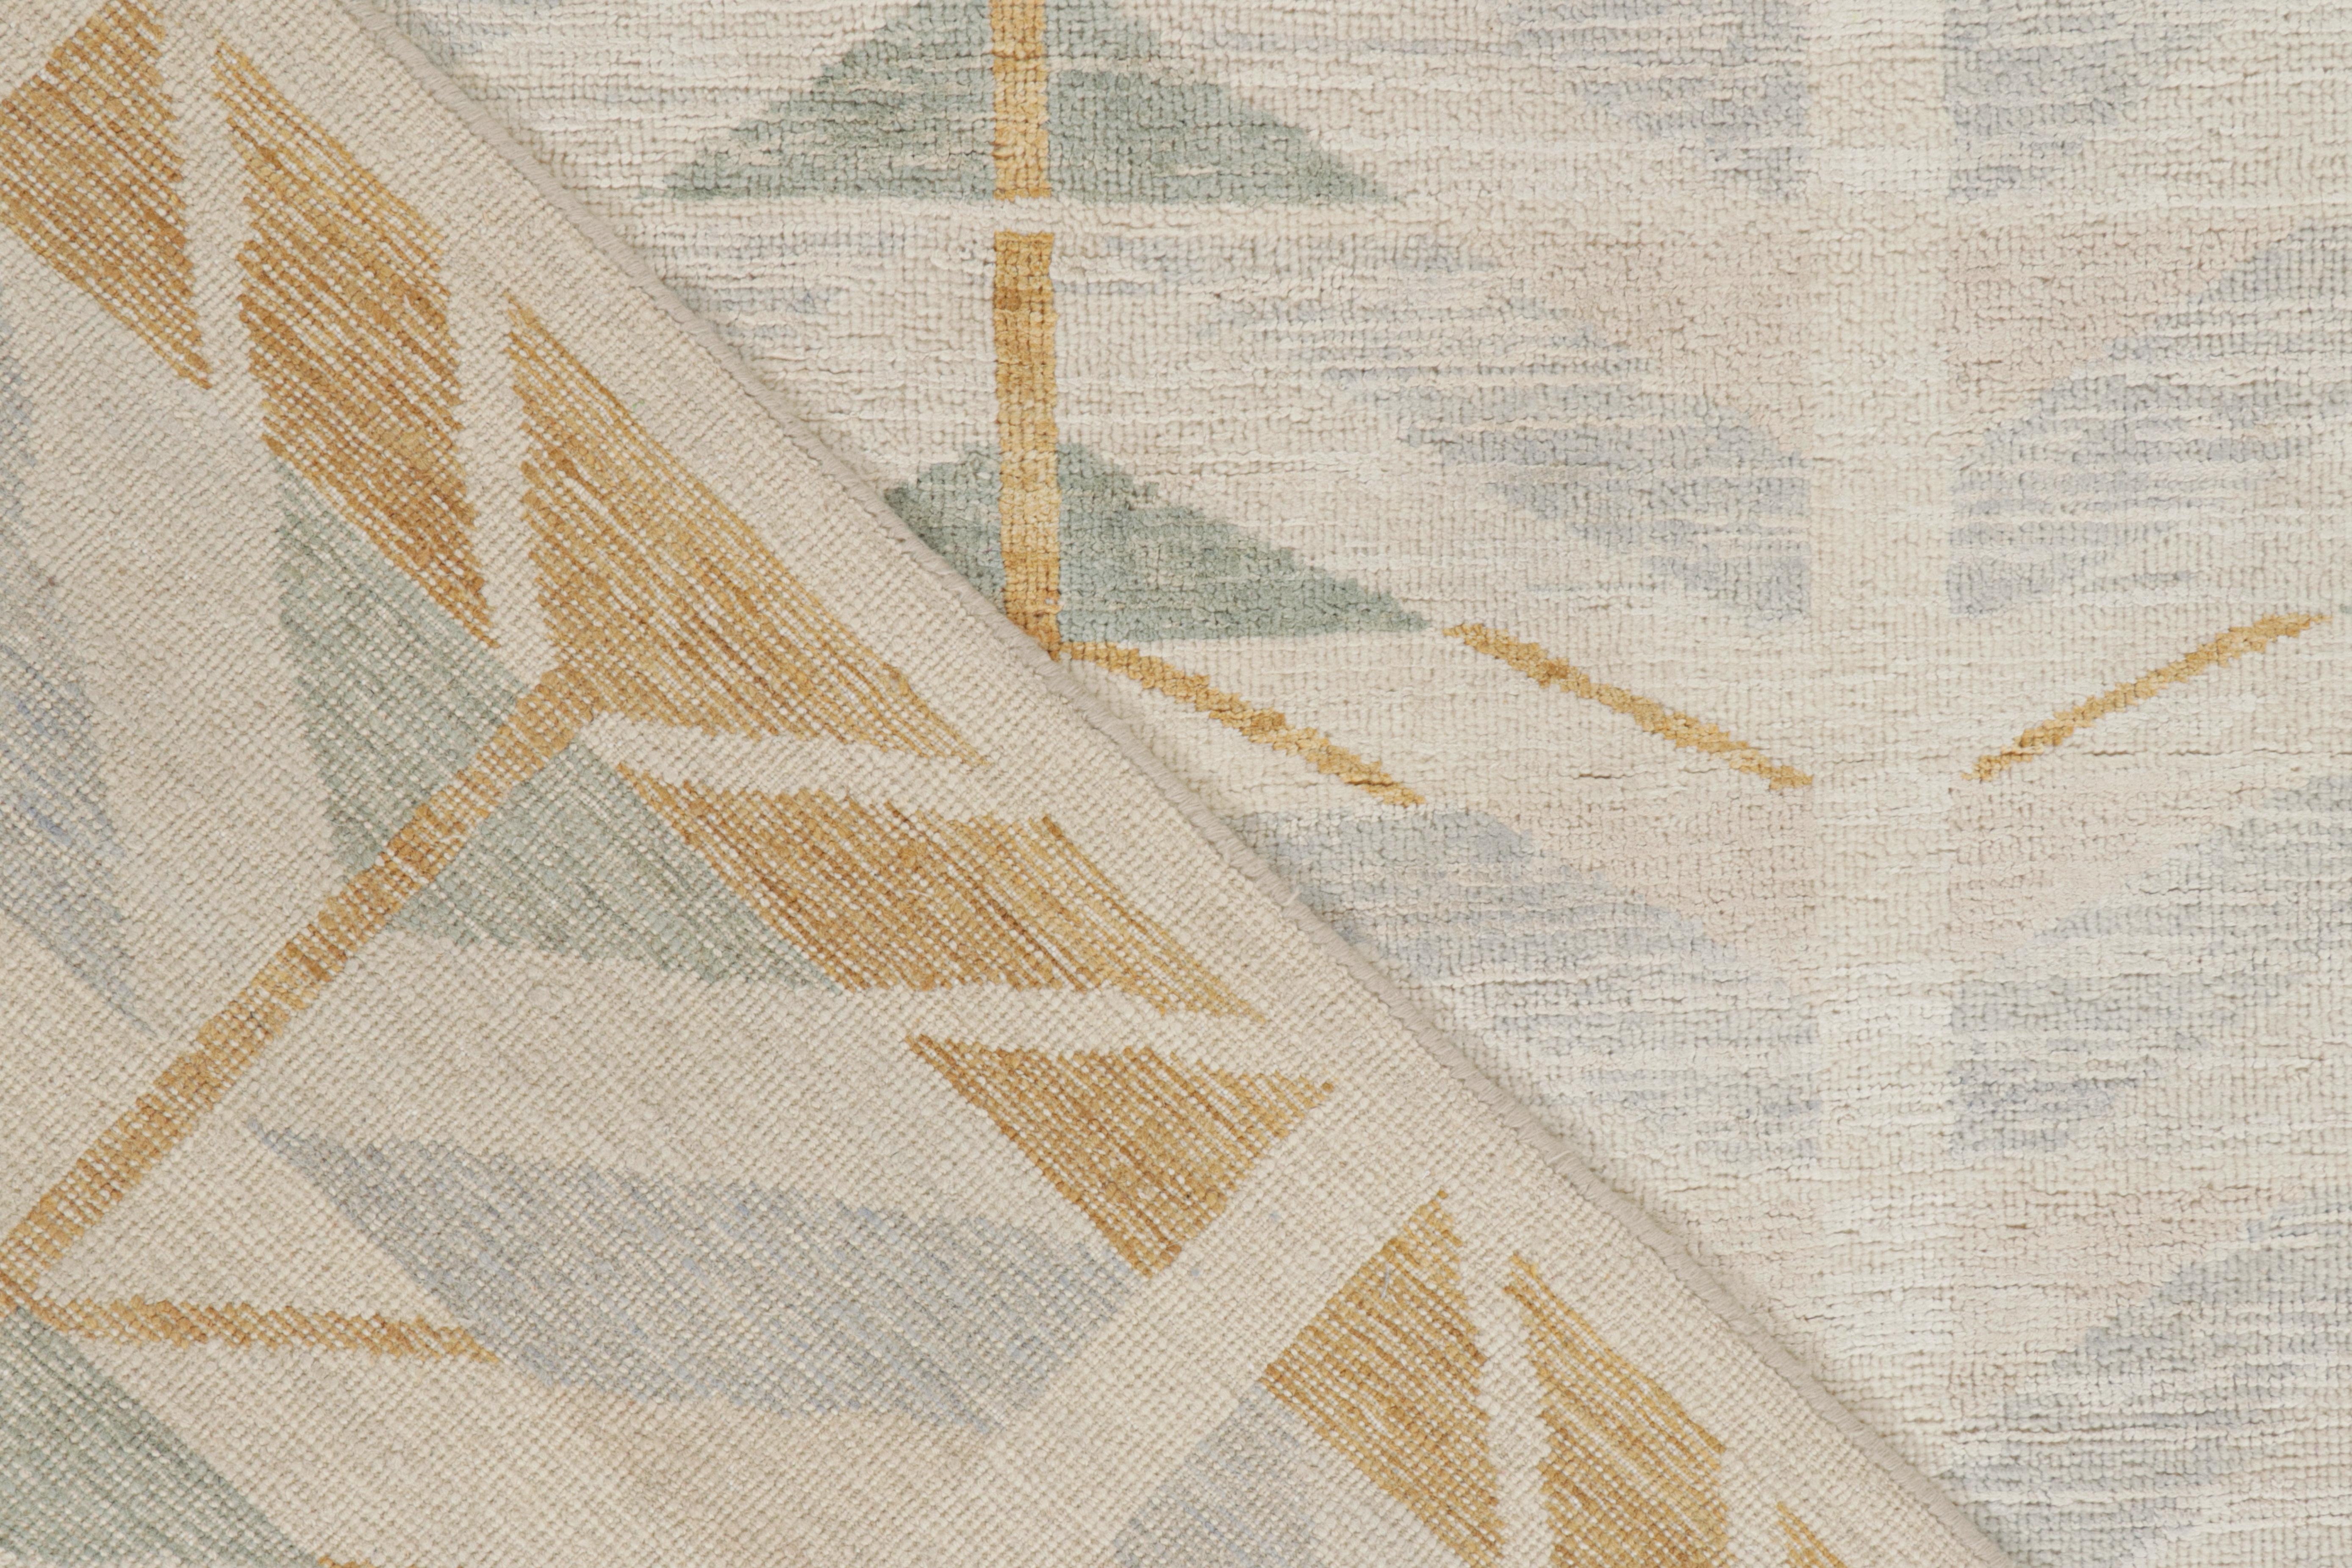 Contemporary Rug & Kilim’s Scandinavian-Style Rug with Gold & Beige Geometric Patterns For Sale